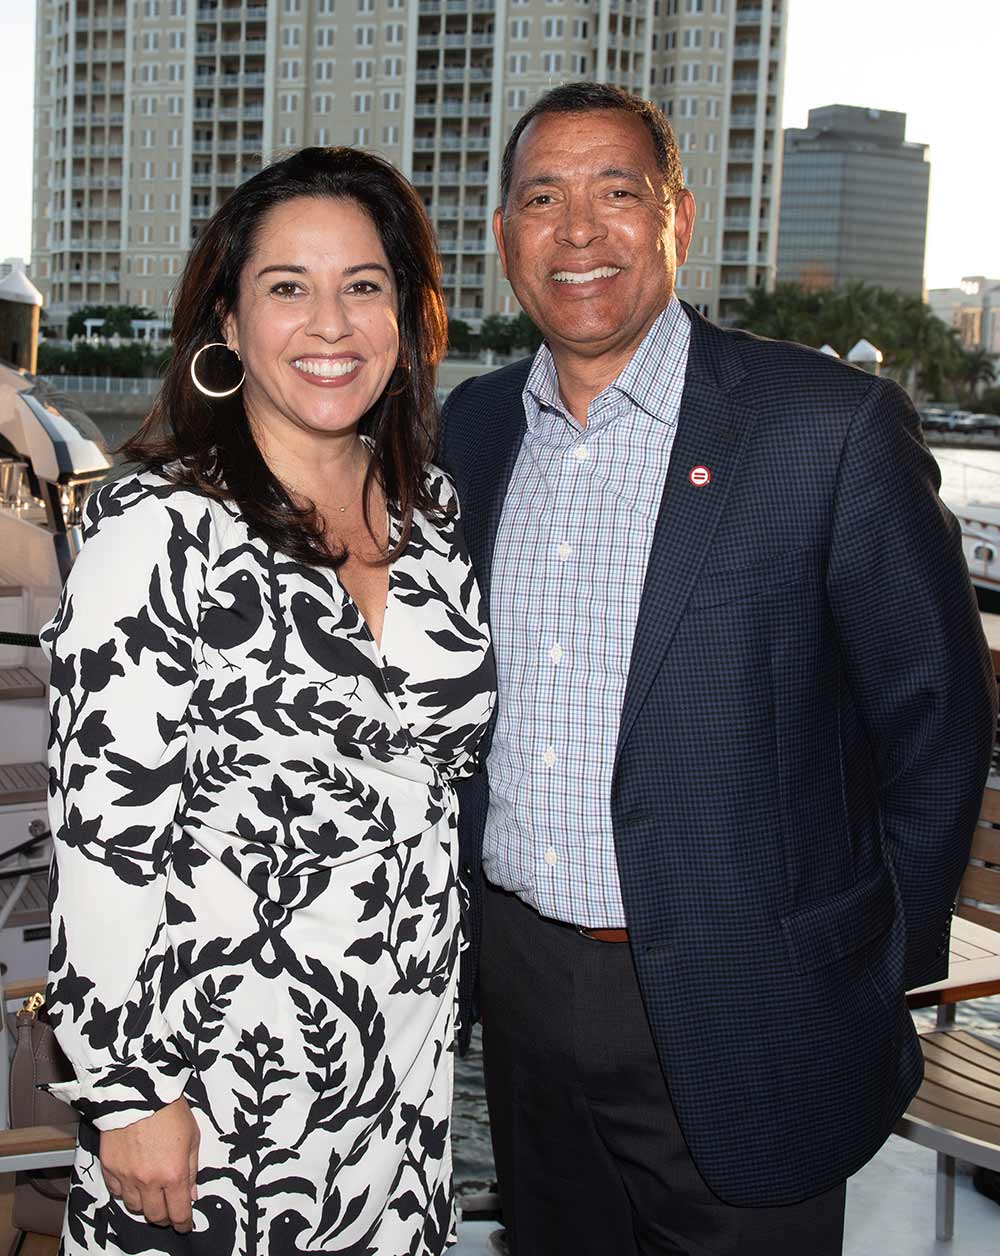 GL Homes hosts event for the Forum Club in West Palm Beach, Florida, attended by the city Commissioner.